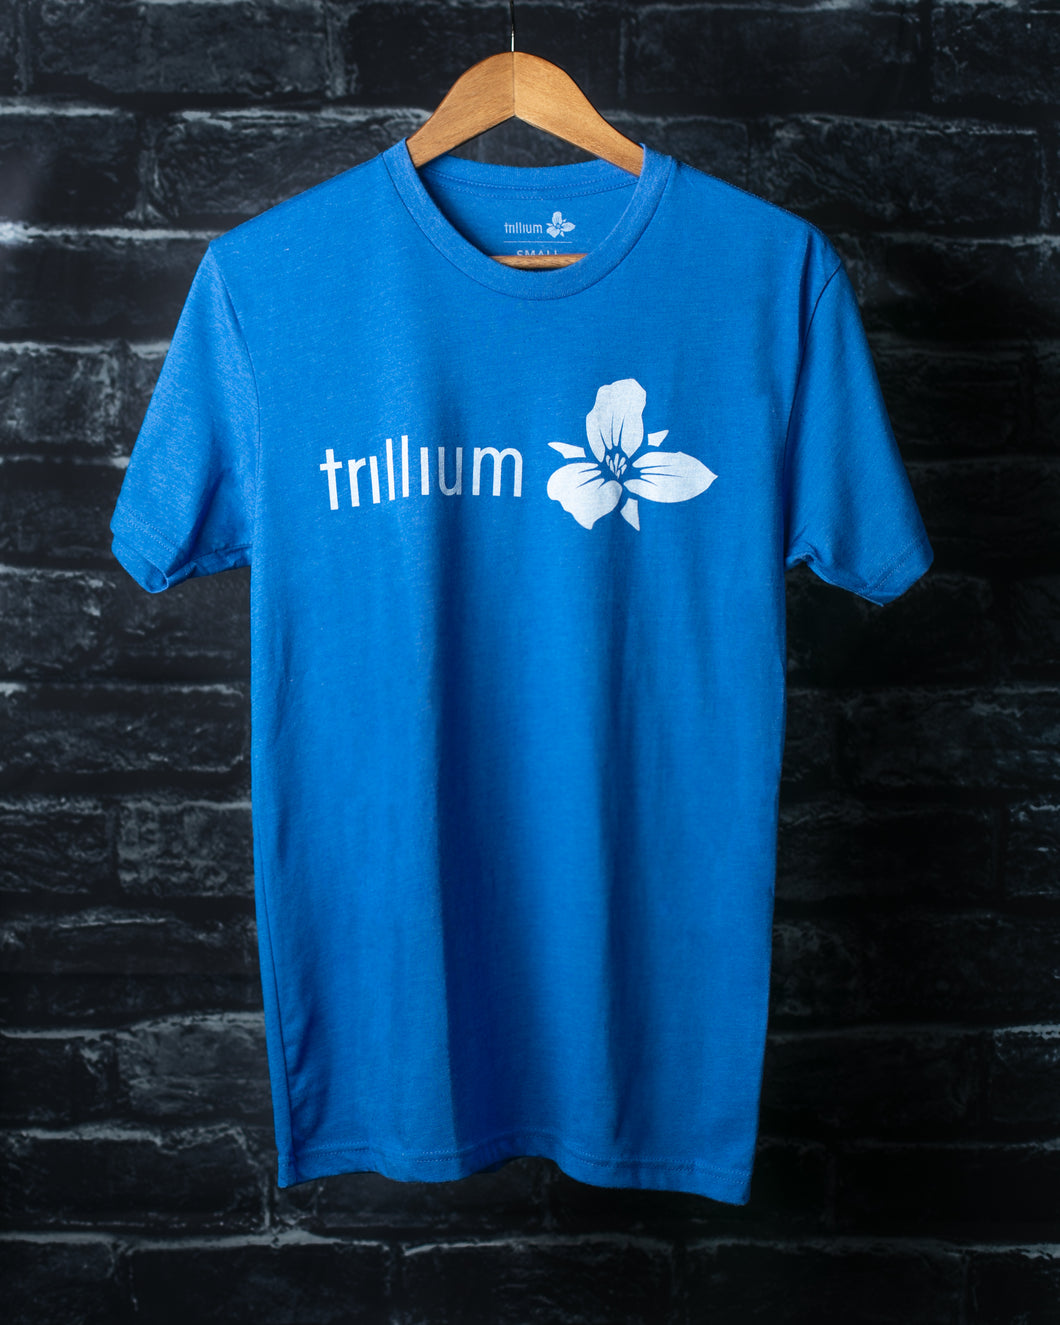 blue t-shirt with Trillium flower logo and horizontal text